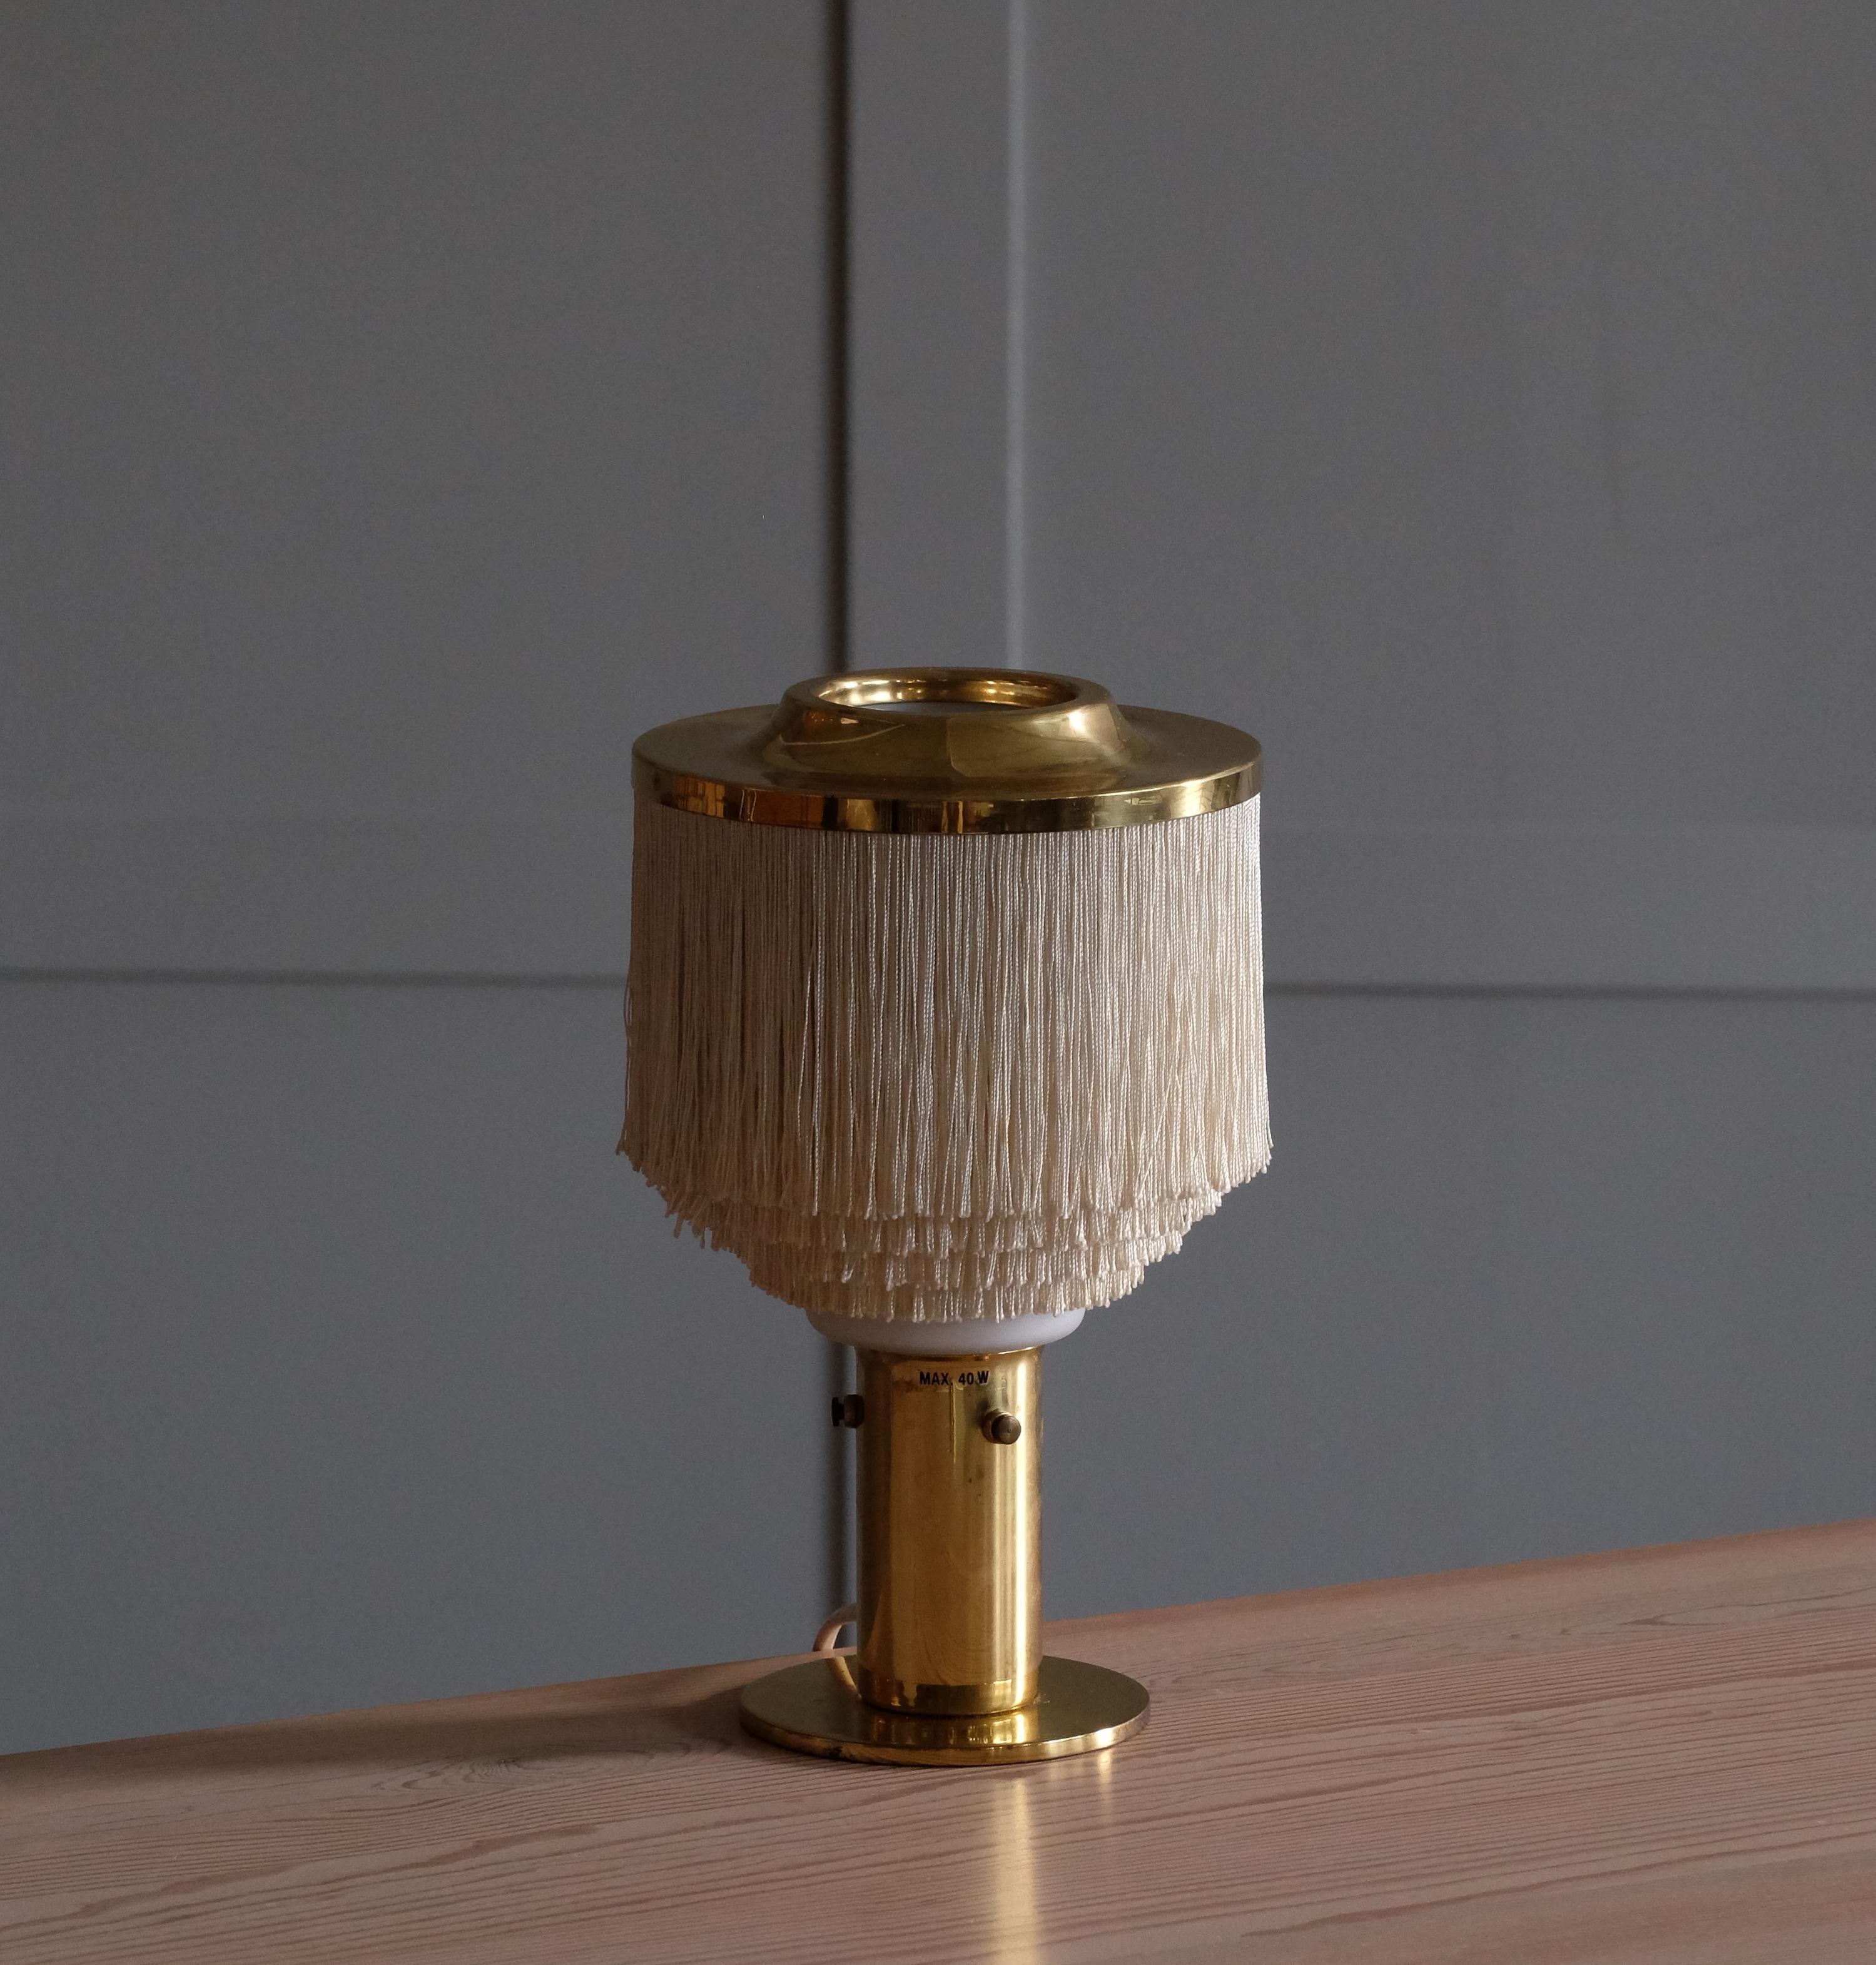 Fringes, brass and opaline glass shade. Produced by Hans-Agne Jakobsson, Markaryd, 1960s.